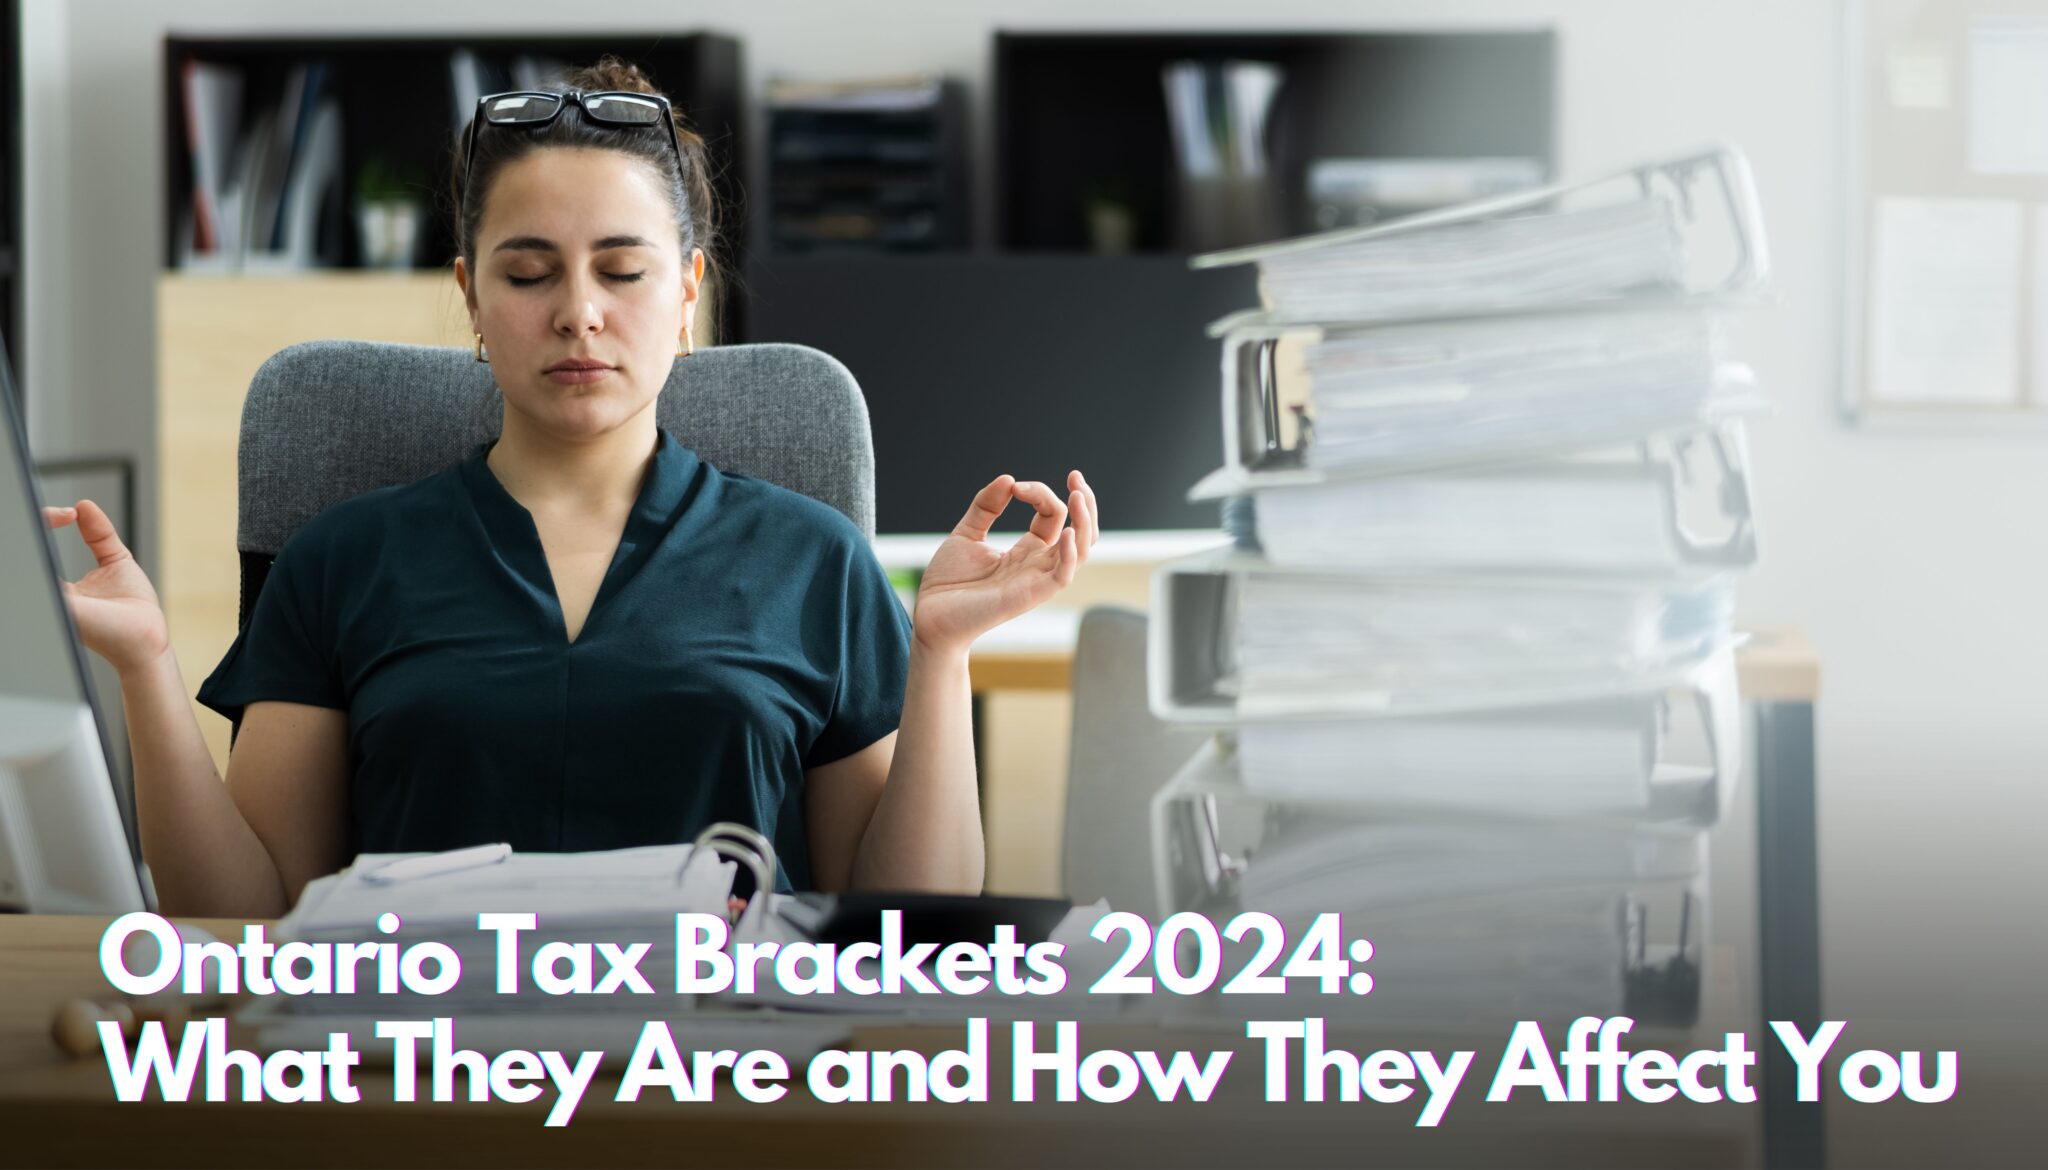 Ontario Tax Brackets 2024 What They Are and How They Affect